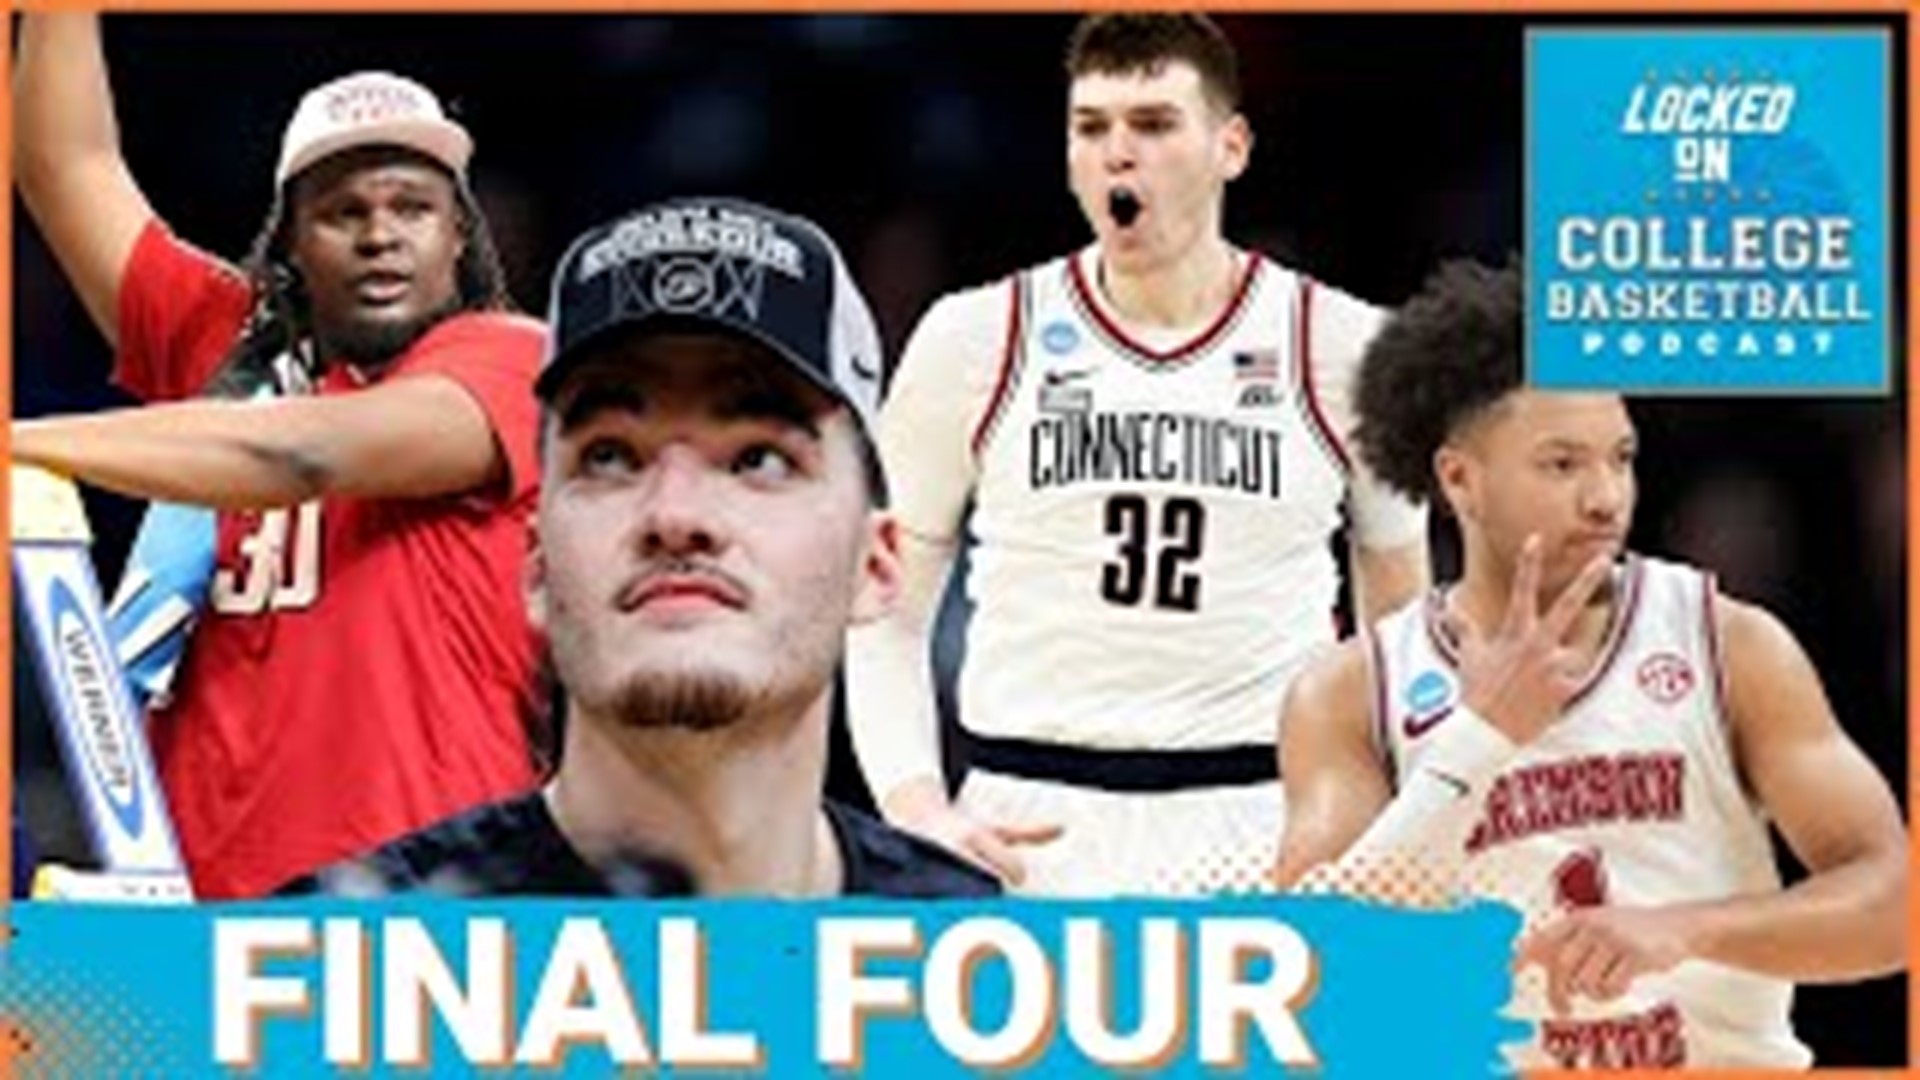 The Final Four is set and the NCAA Tournament field is down to the UConn Huskies, the Alabama Crimson Tide, the Purdue Boilermakers, and the NC State Wolfpack.